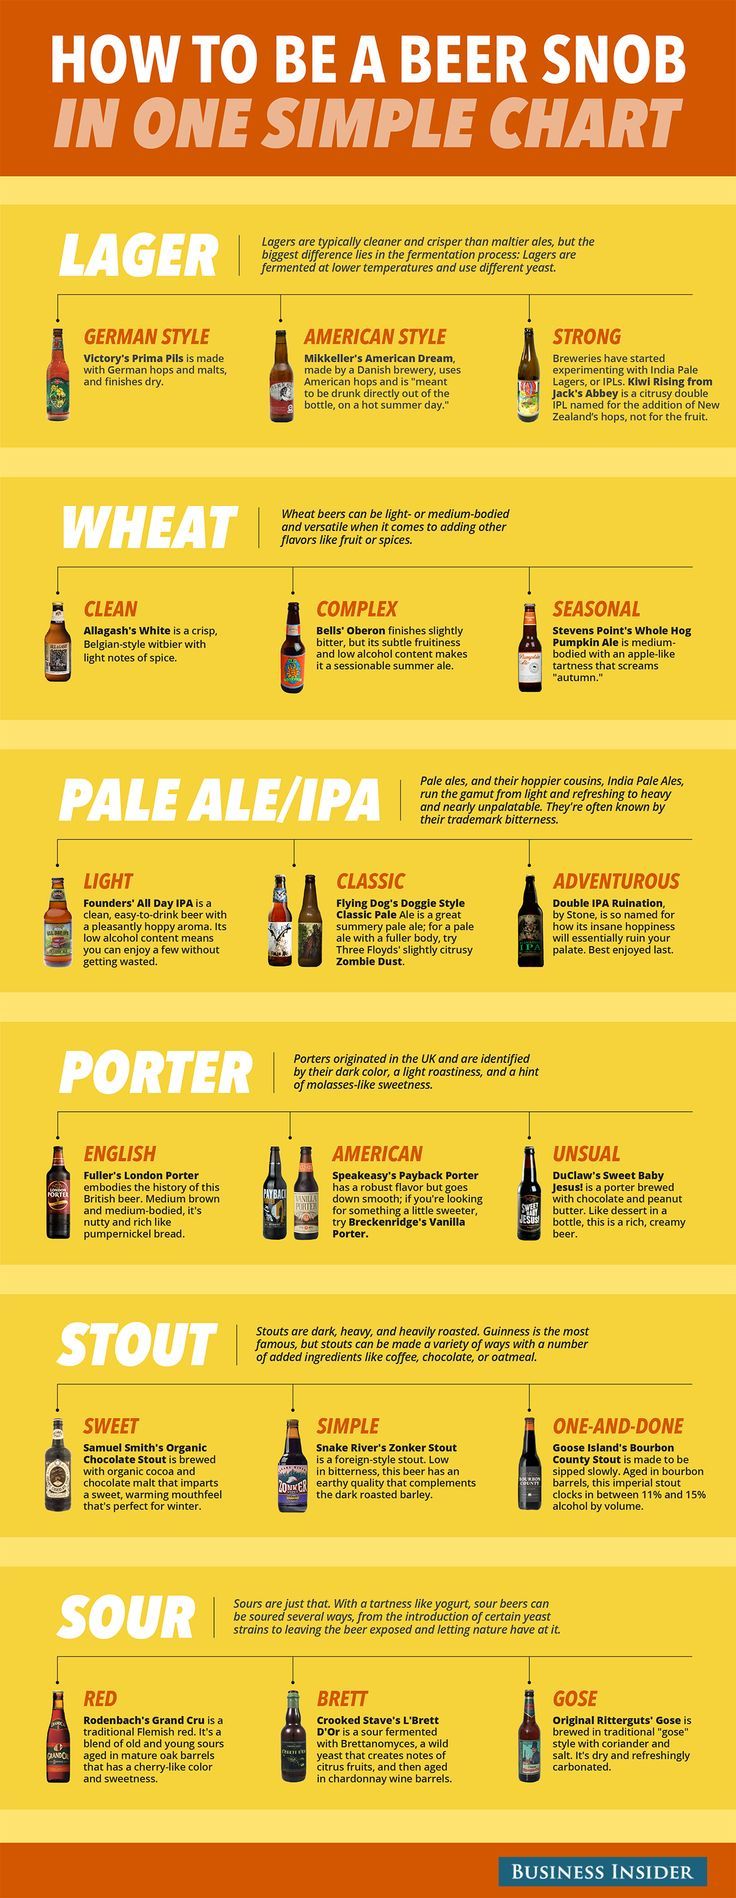 How To Be A Beer Snob In One Simple Chart